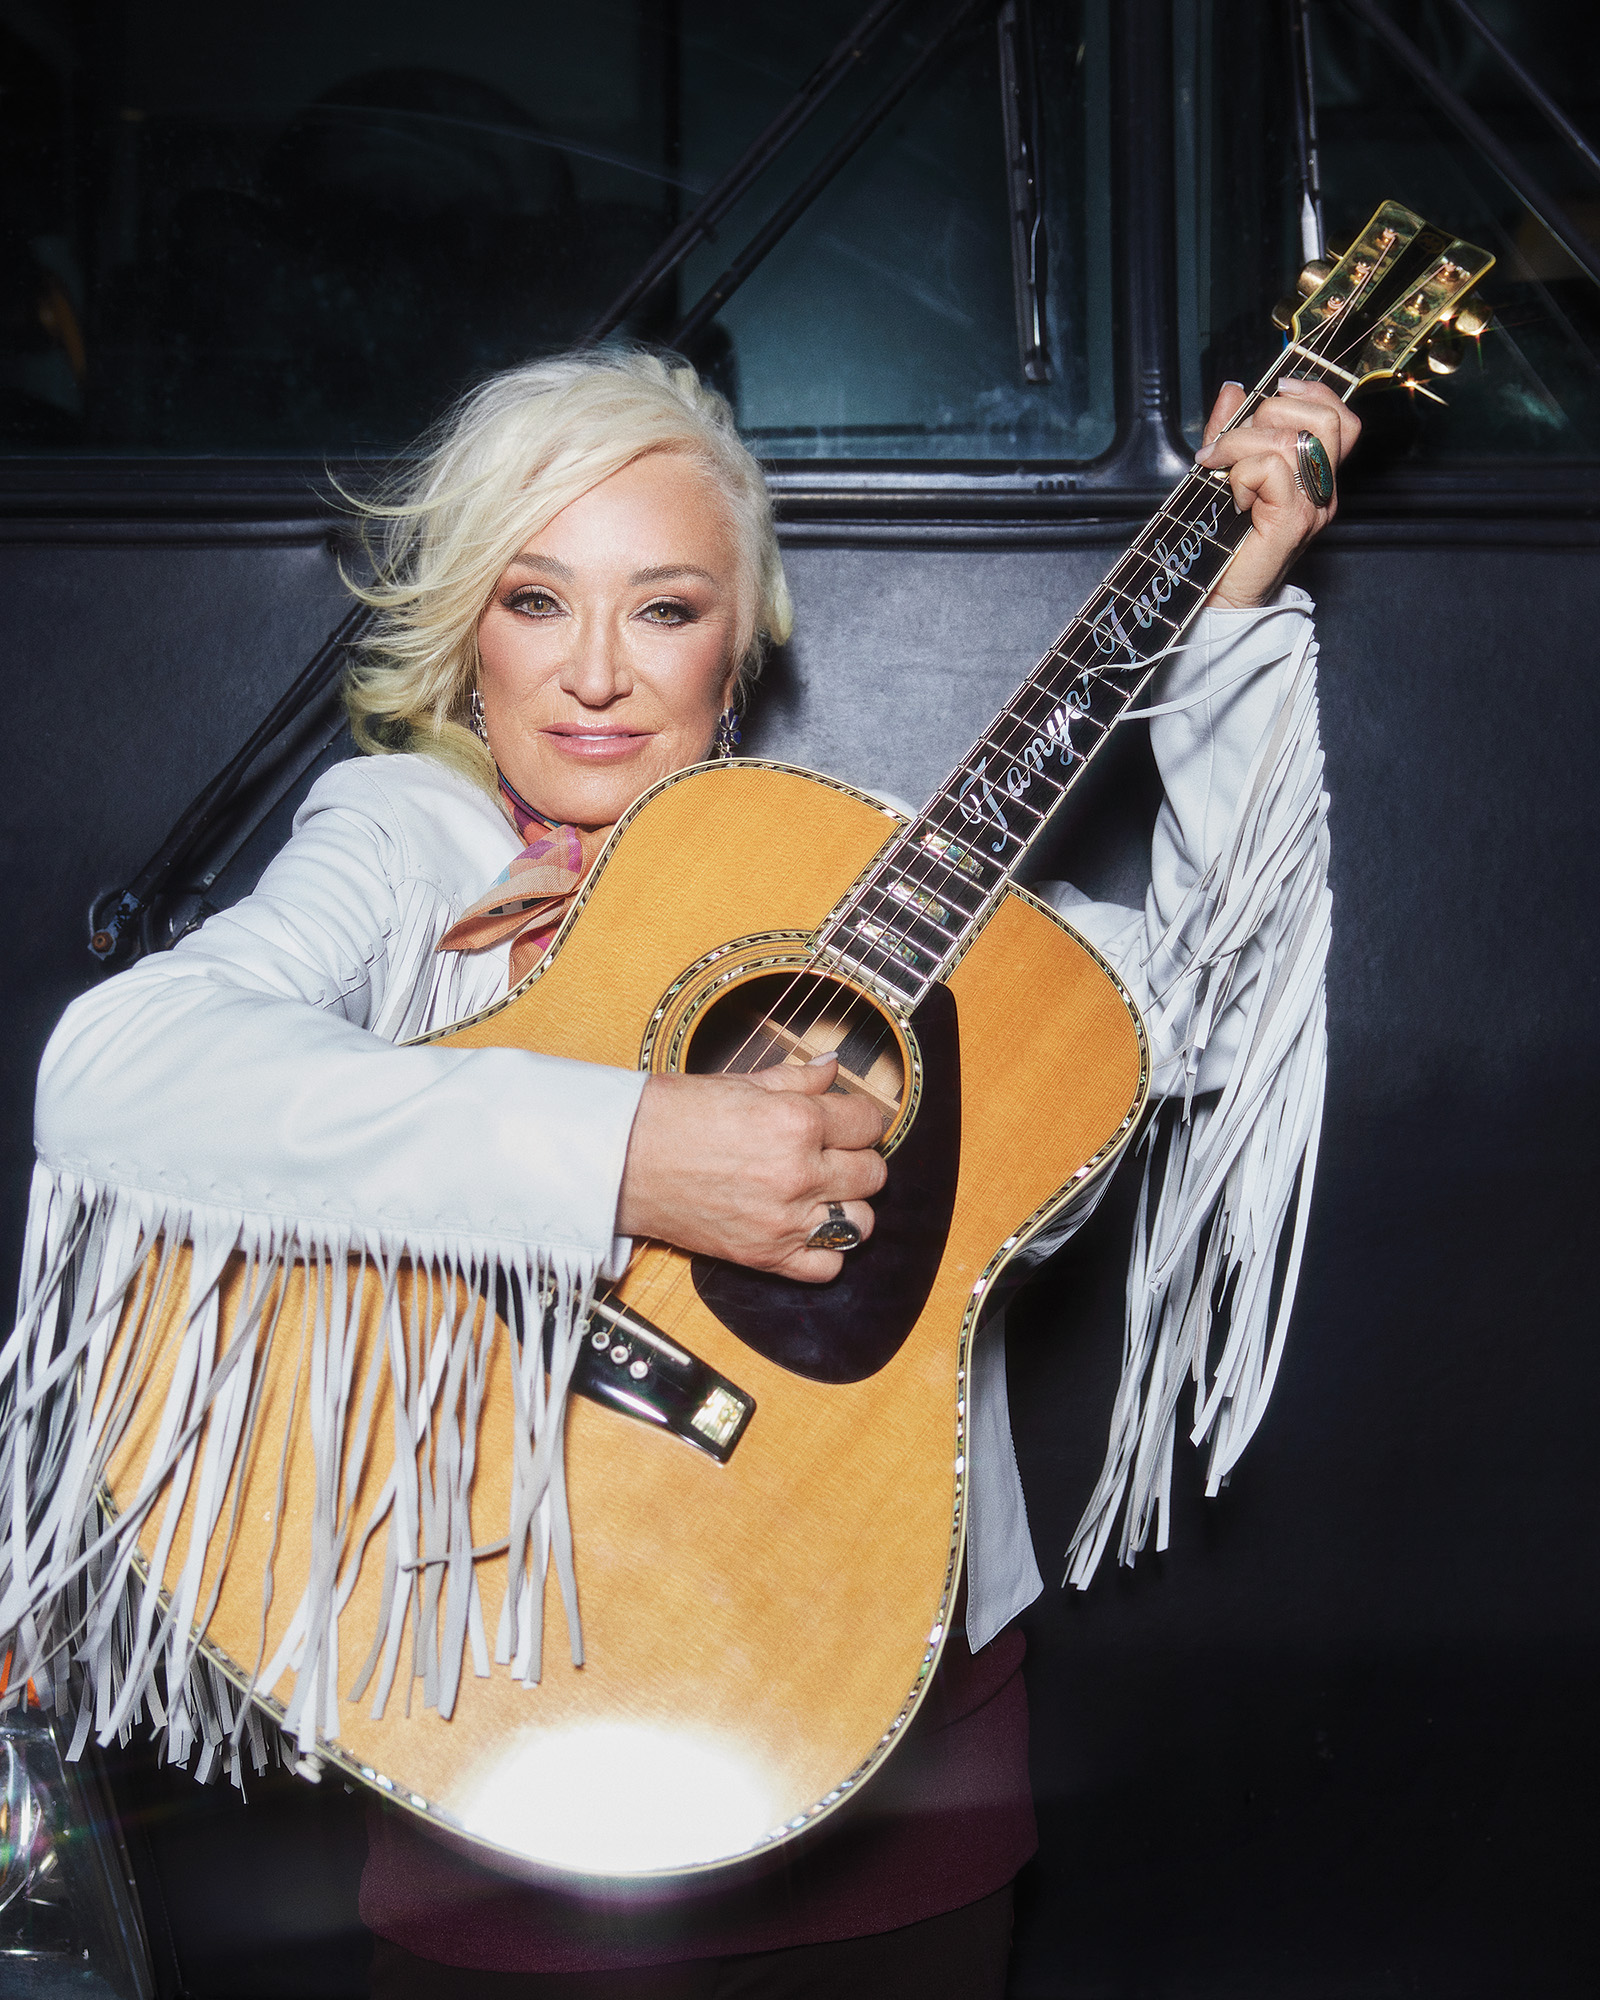 Tanya Tucker Is Finally Getting the Recognition She Deserves